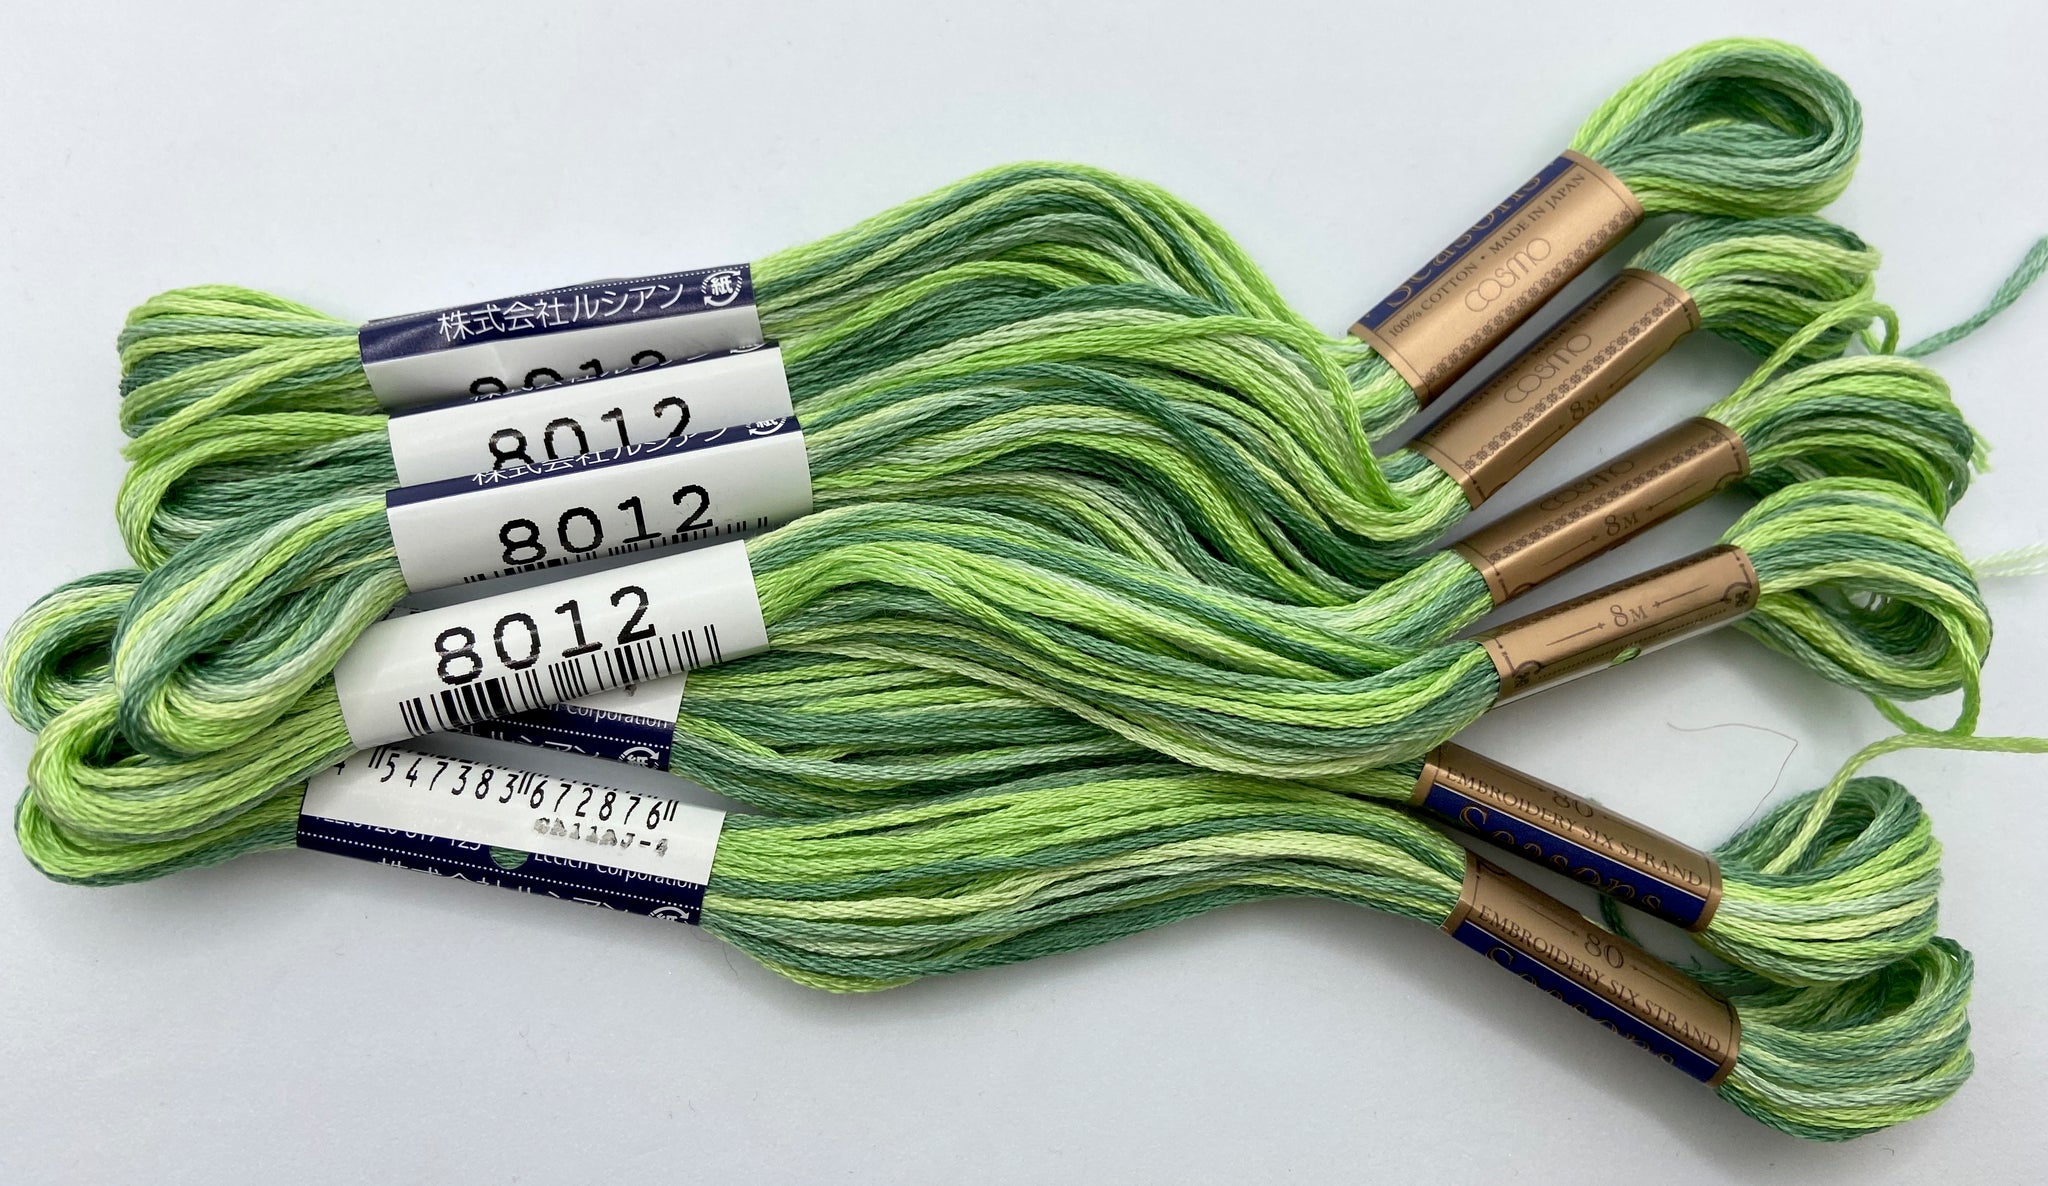 Hand Embroidery Floss - Cosmo Seasons Variegated #8031